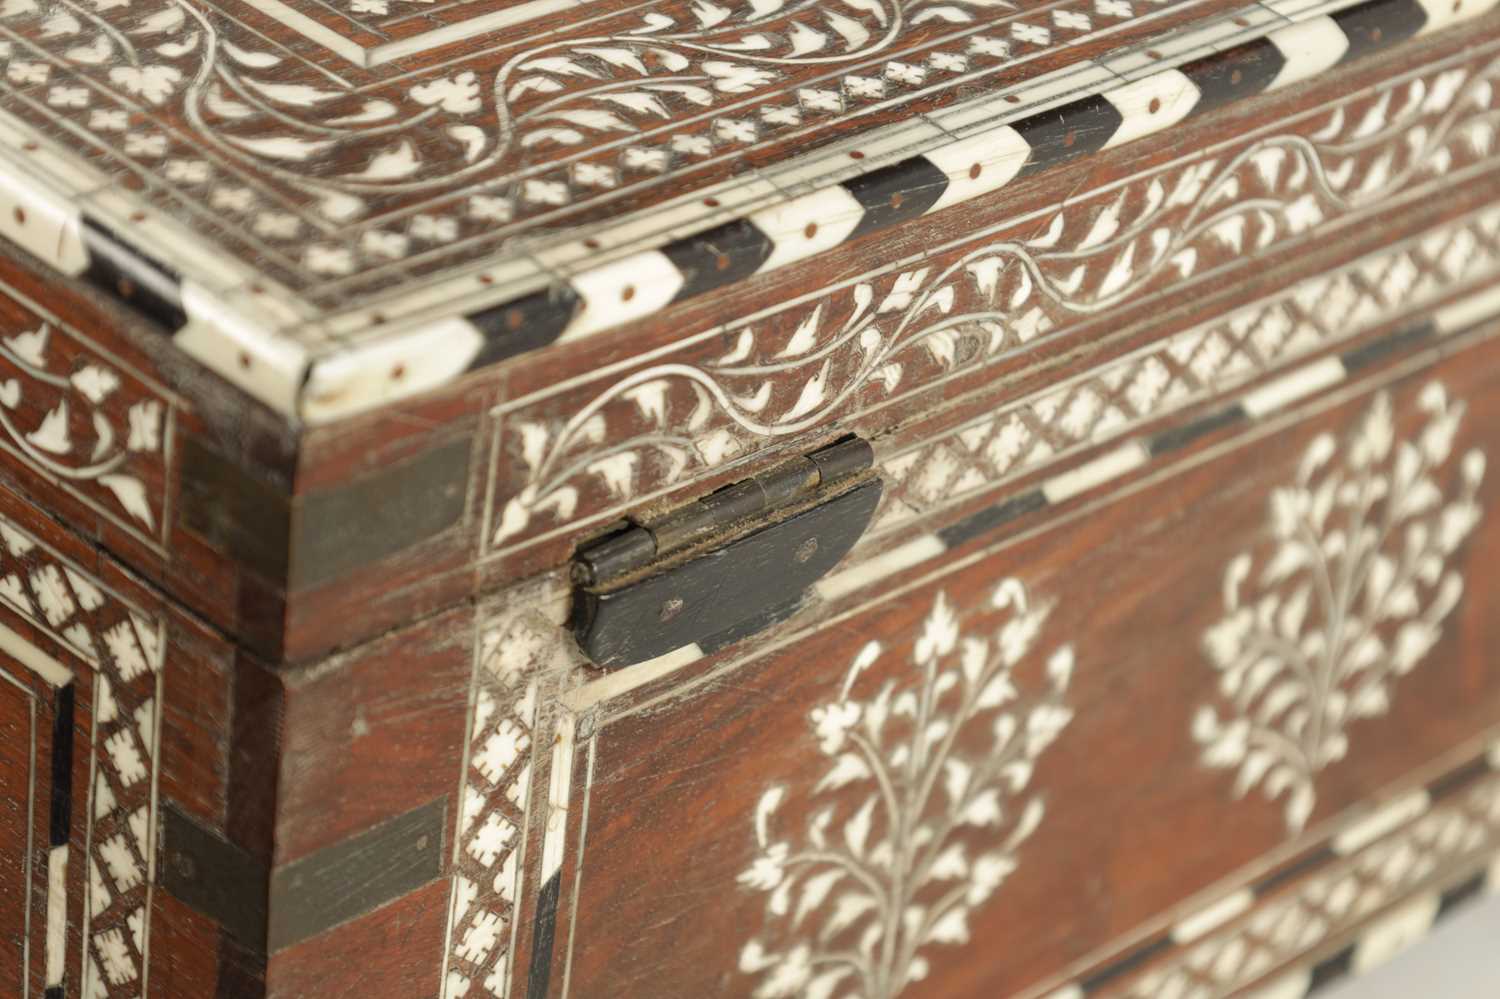 A LARGE LATE 19TH CENTURY ANGLO-INDIAN IVORY AND EBONY INLAID WORKBOX - Image 10 of 10